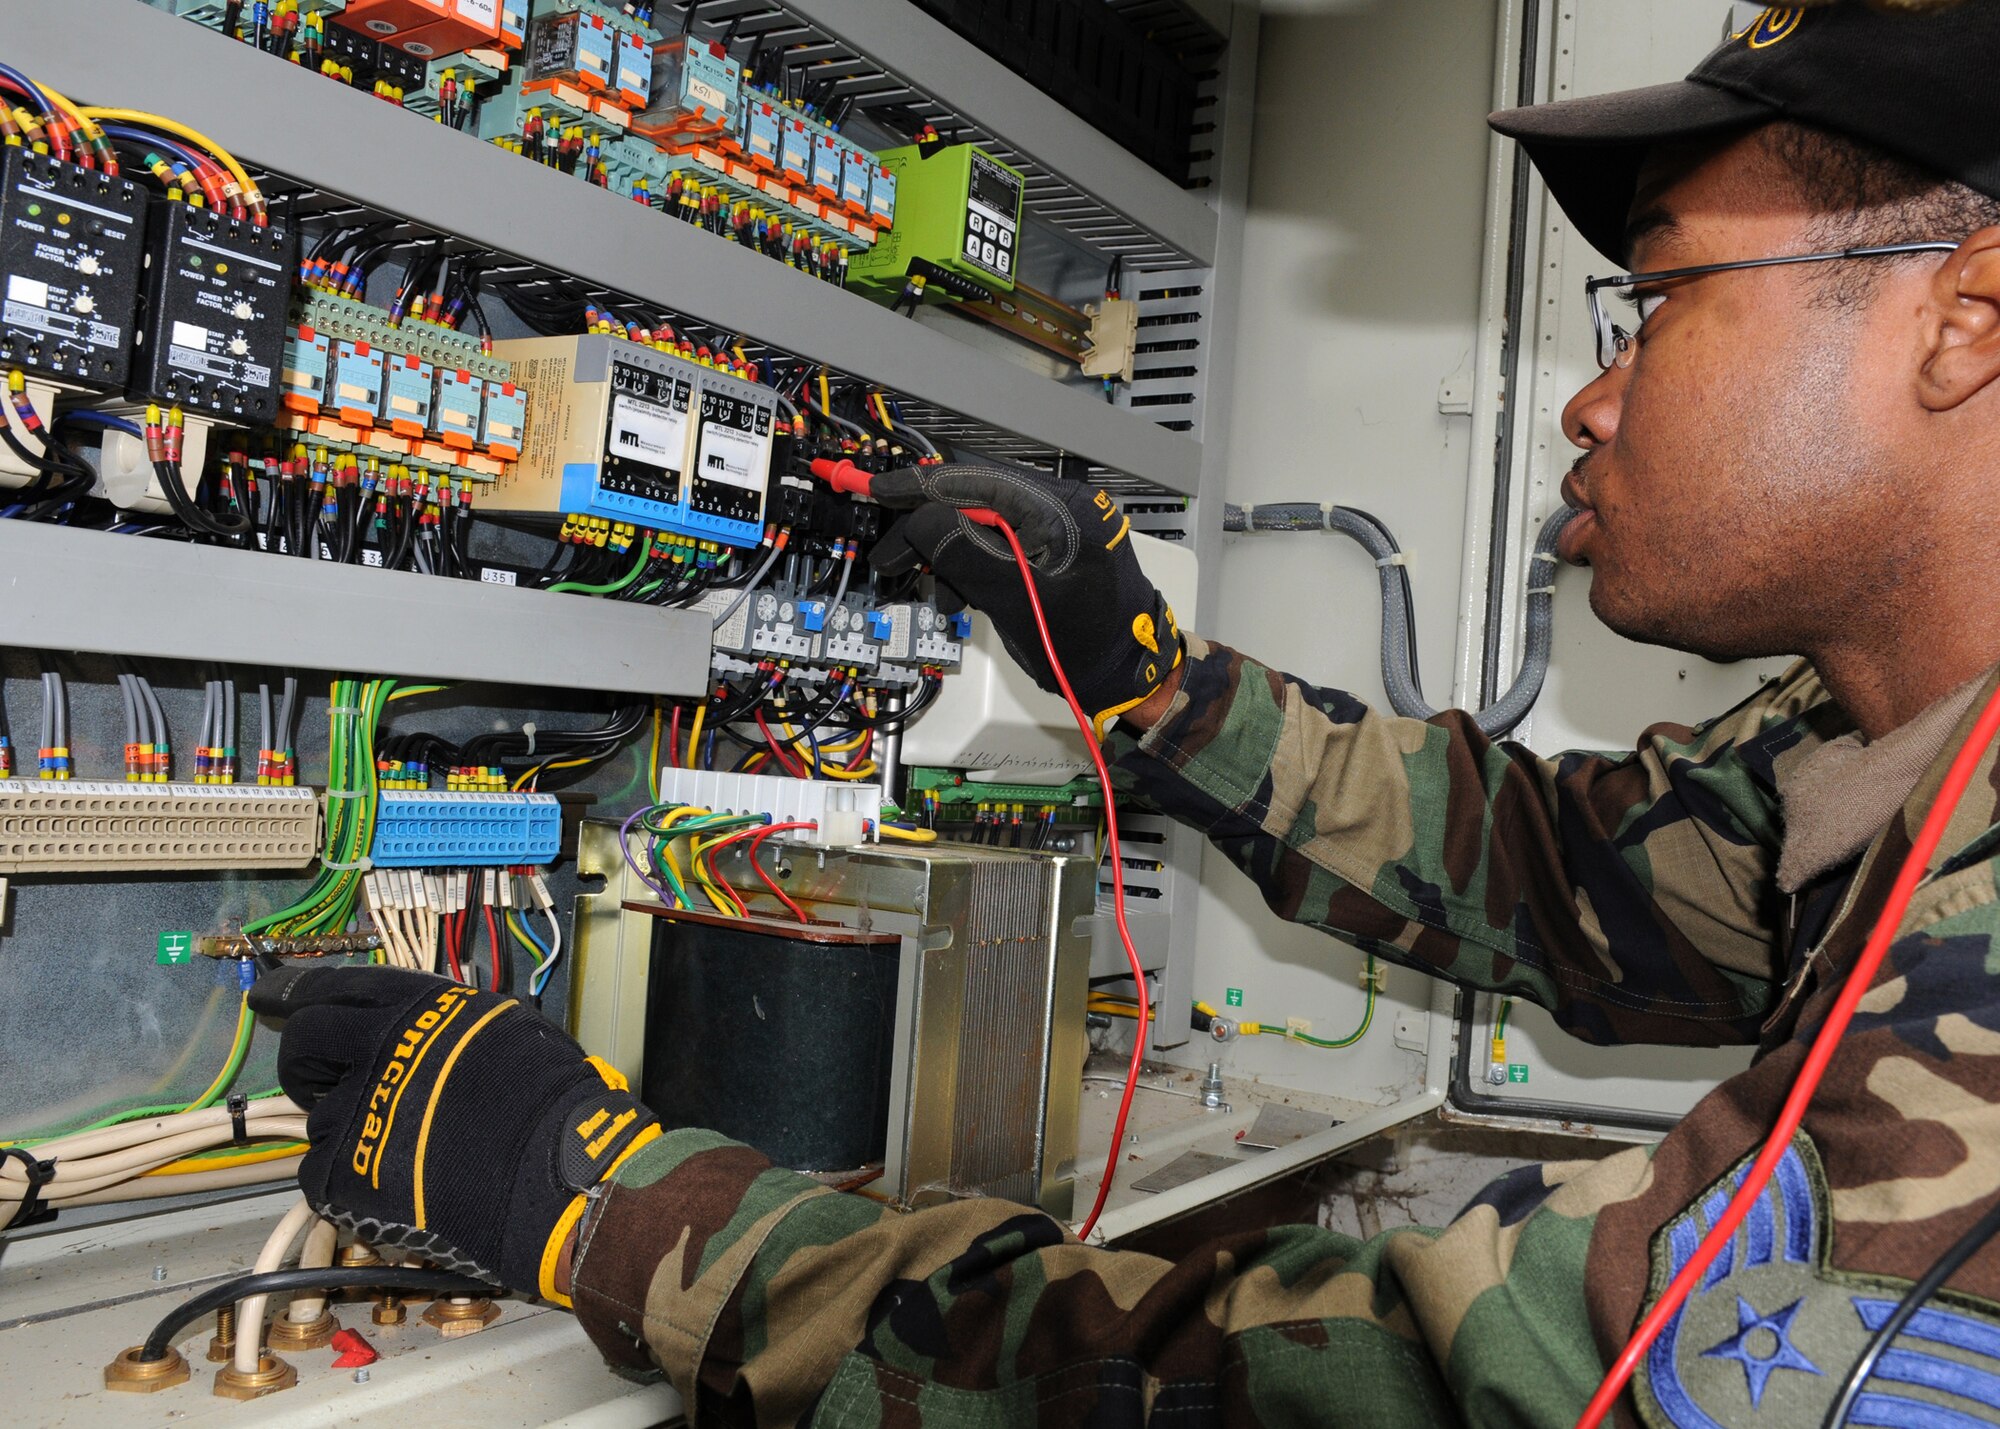 RAF MILDENHALL, England – Staff Sgt. Taraus Boyd, 100th Civil Engineer Squadron, electrical technician craftsman, checks for proper voltage using a multimeter during troubleshooting procedures at the waste plant Sept. 3, 2009. Sgt. Boyd is trying to restore proper voltage to a pump that was not receiving adequate power. To find the problem area he must patiently check each individual wire to locate the faulty part. (U.S. Air Force photo by Staff Sgt. Jerry Fleshman)